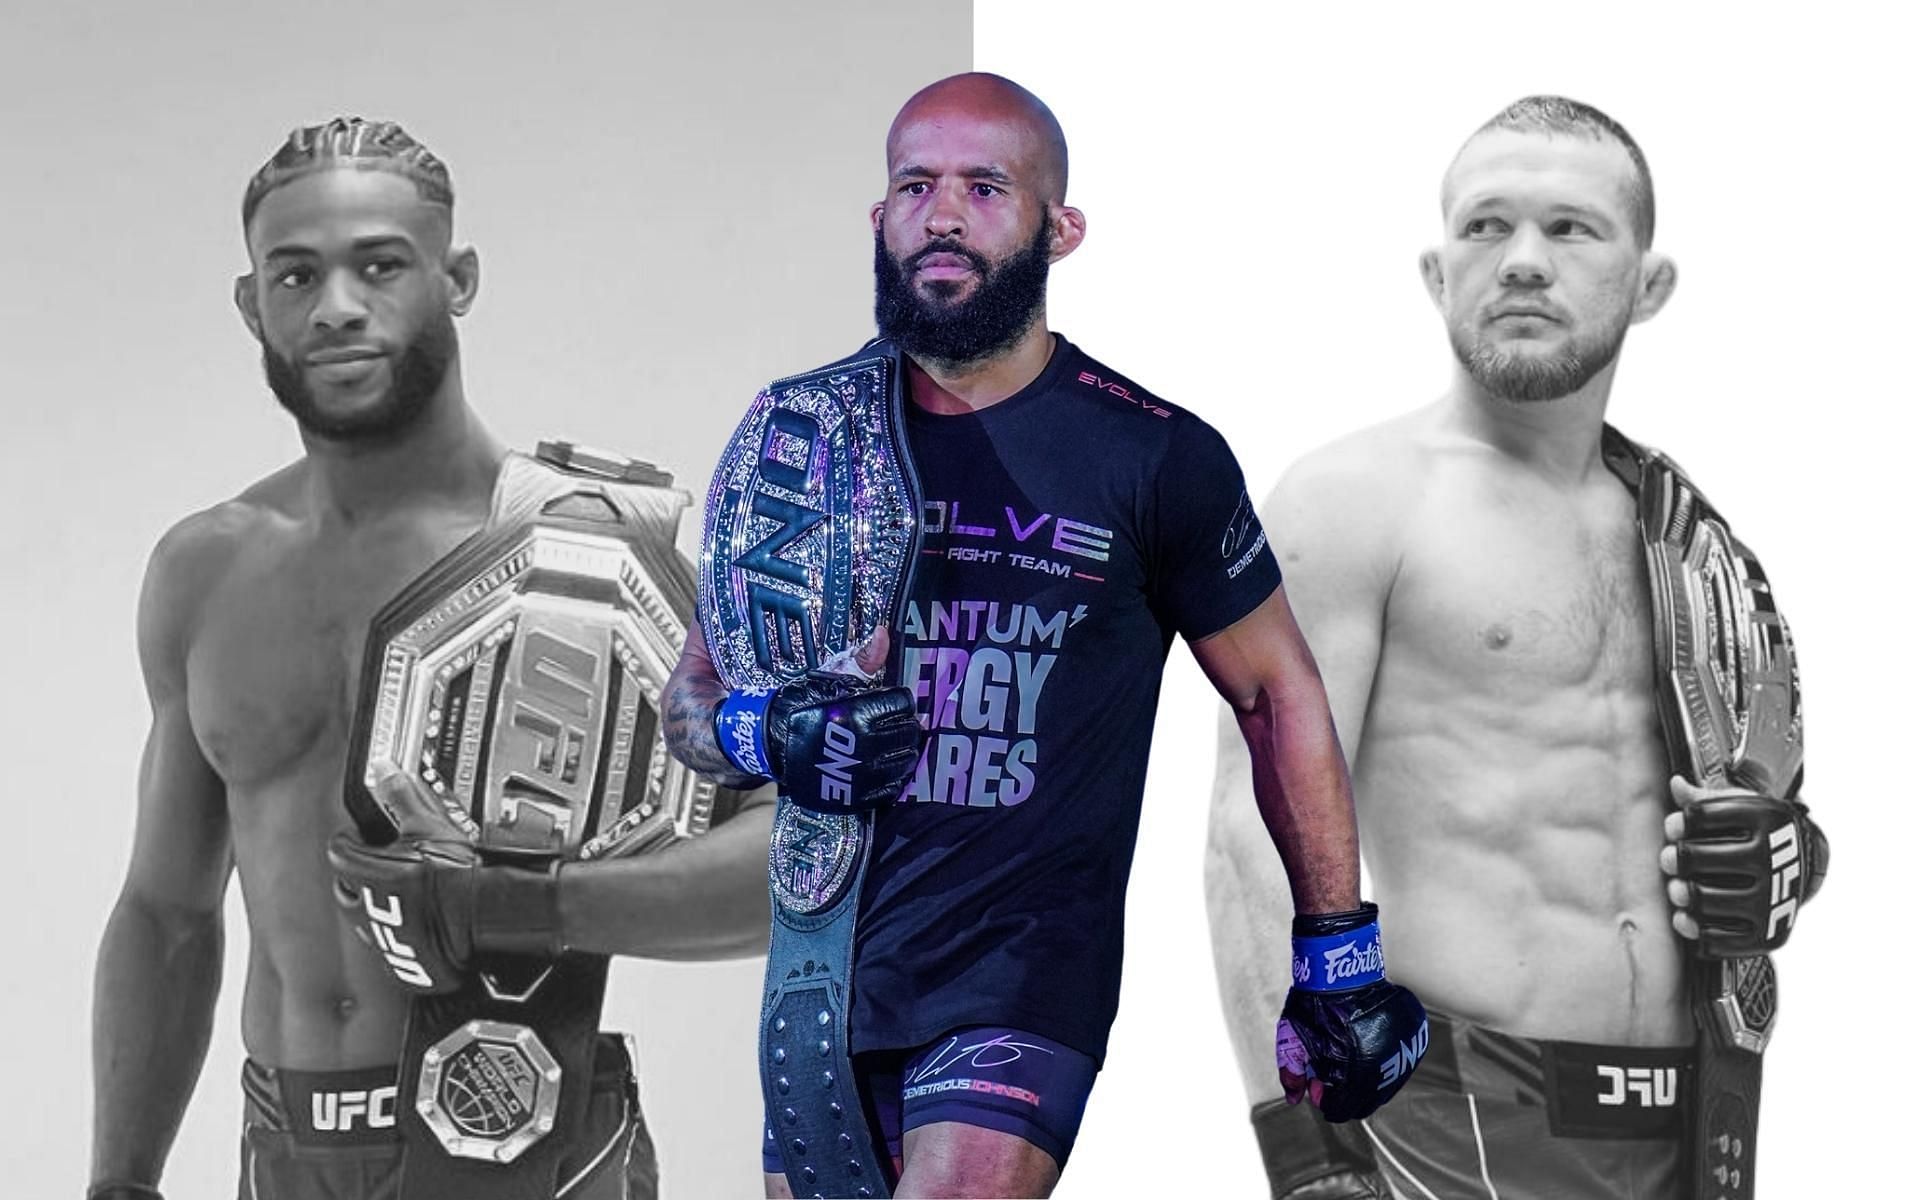 Demetrious Johnson (center) thinks he can handle UFC champions Aljamain Sterling (left) and Petr Yan (right) at 135 pounds. (Images courtesy: The UFC, ONE Championship)